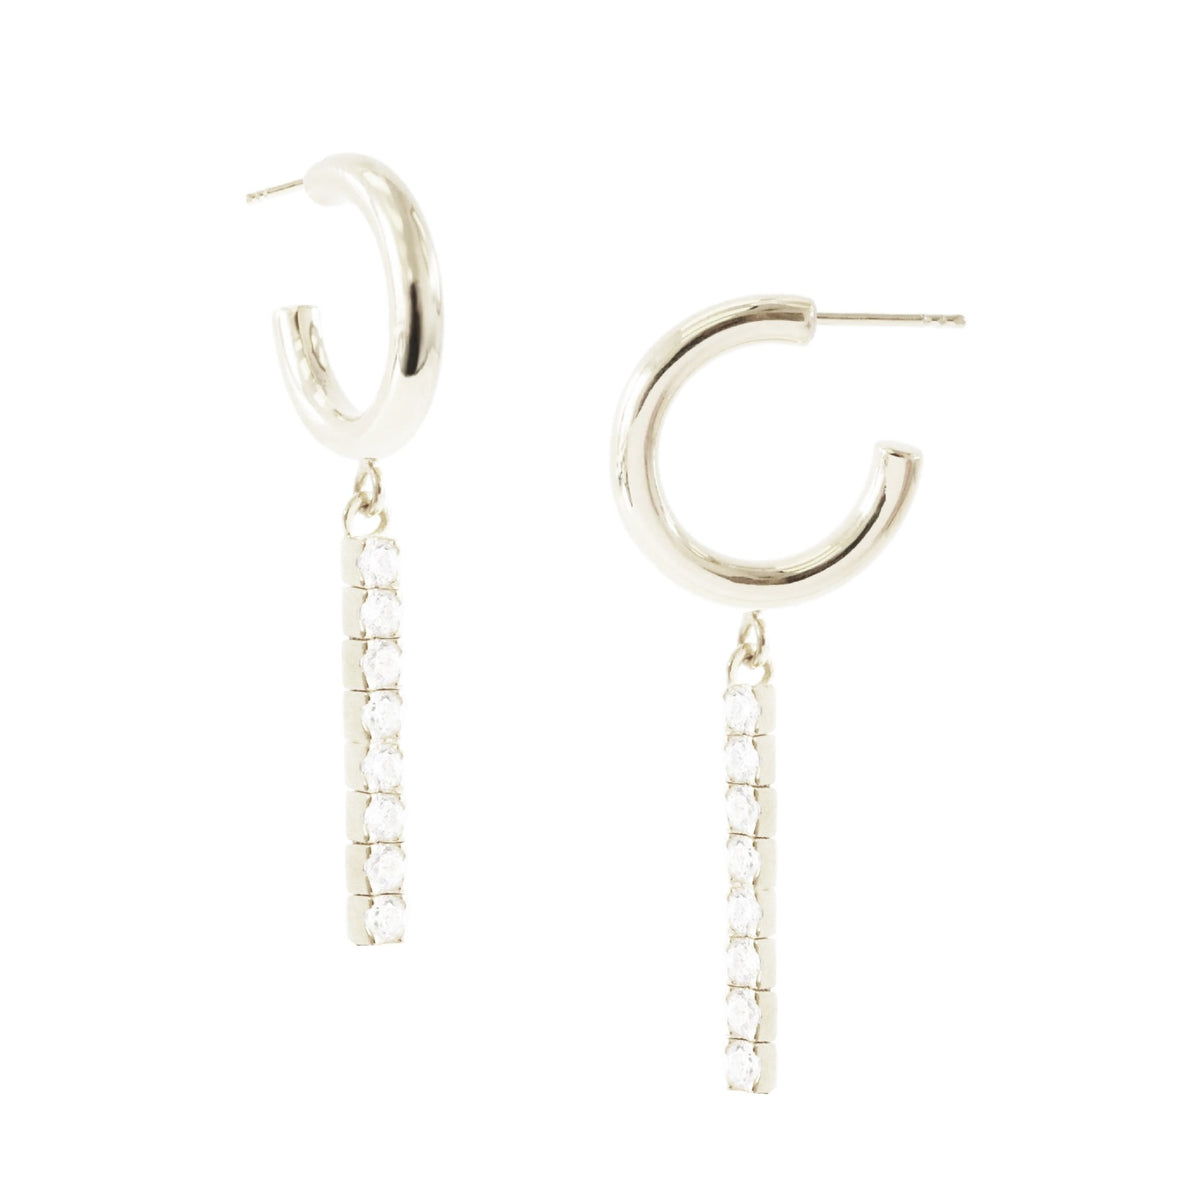 LOVE TENNIS HOOPS - CUBIC ZIRCONIA &amp; SILVER - SO PRETTY CARA COTTER